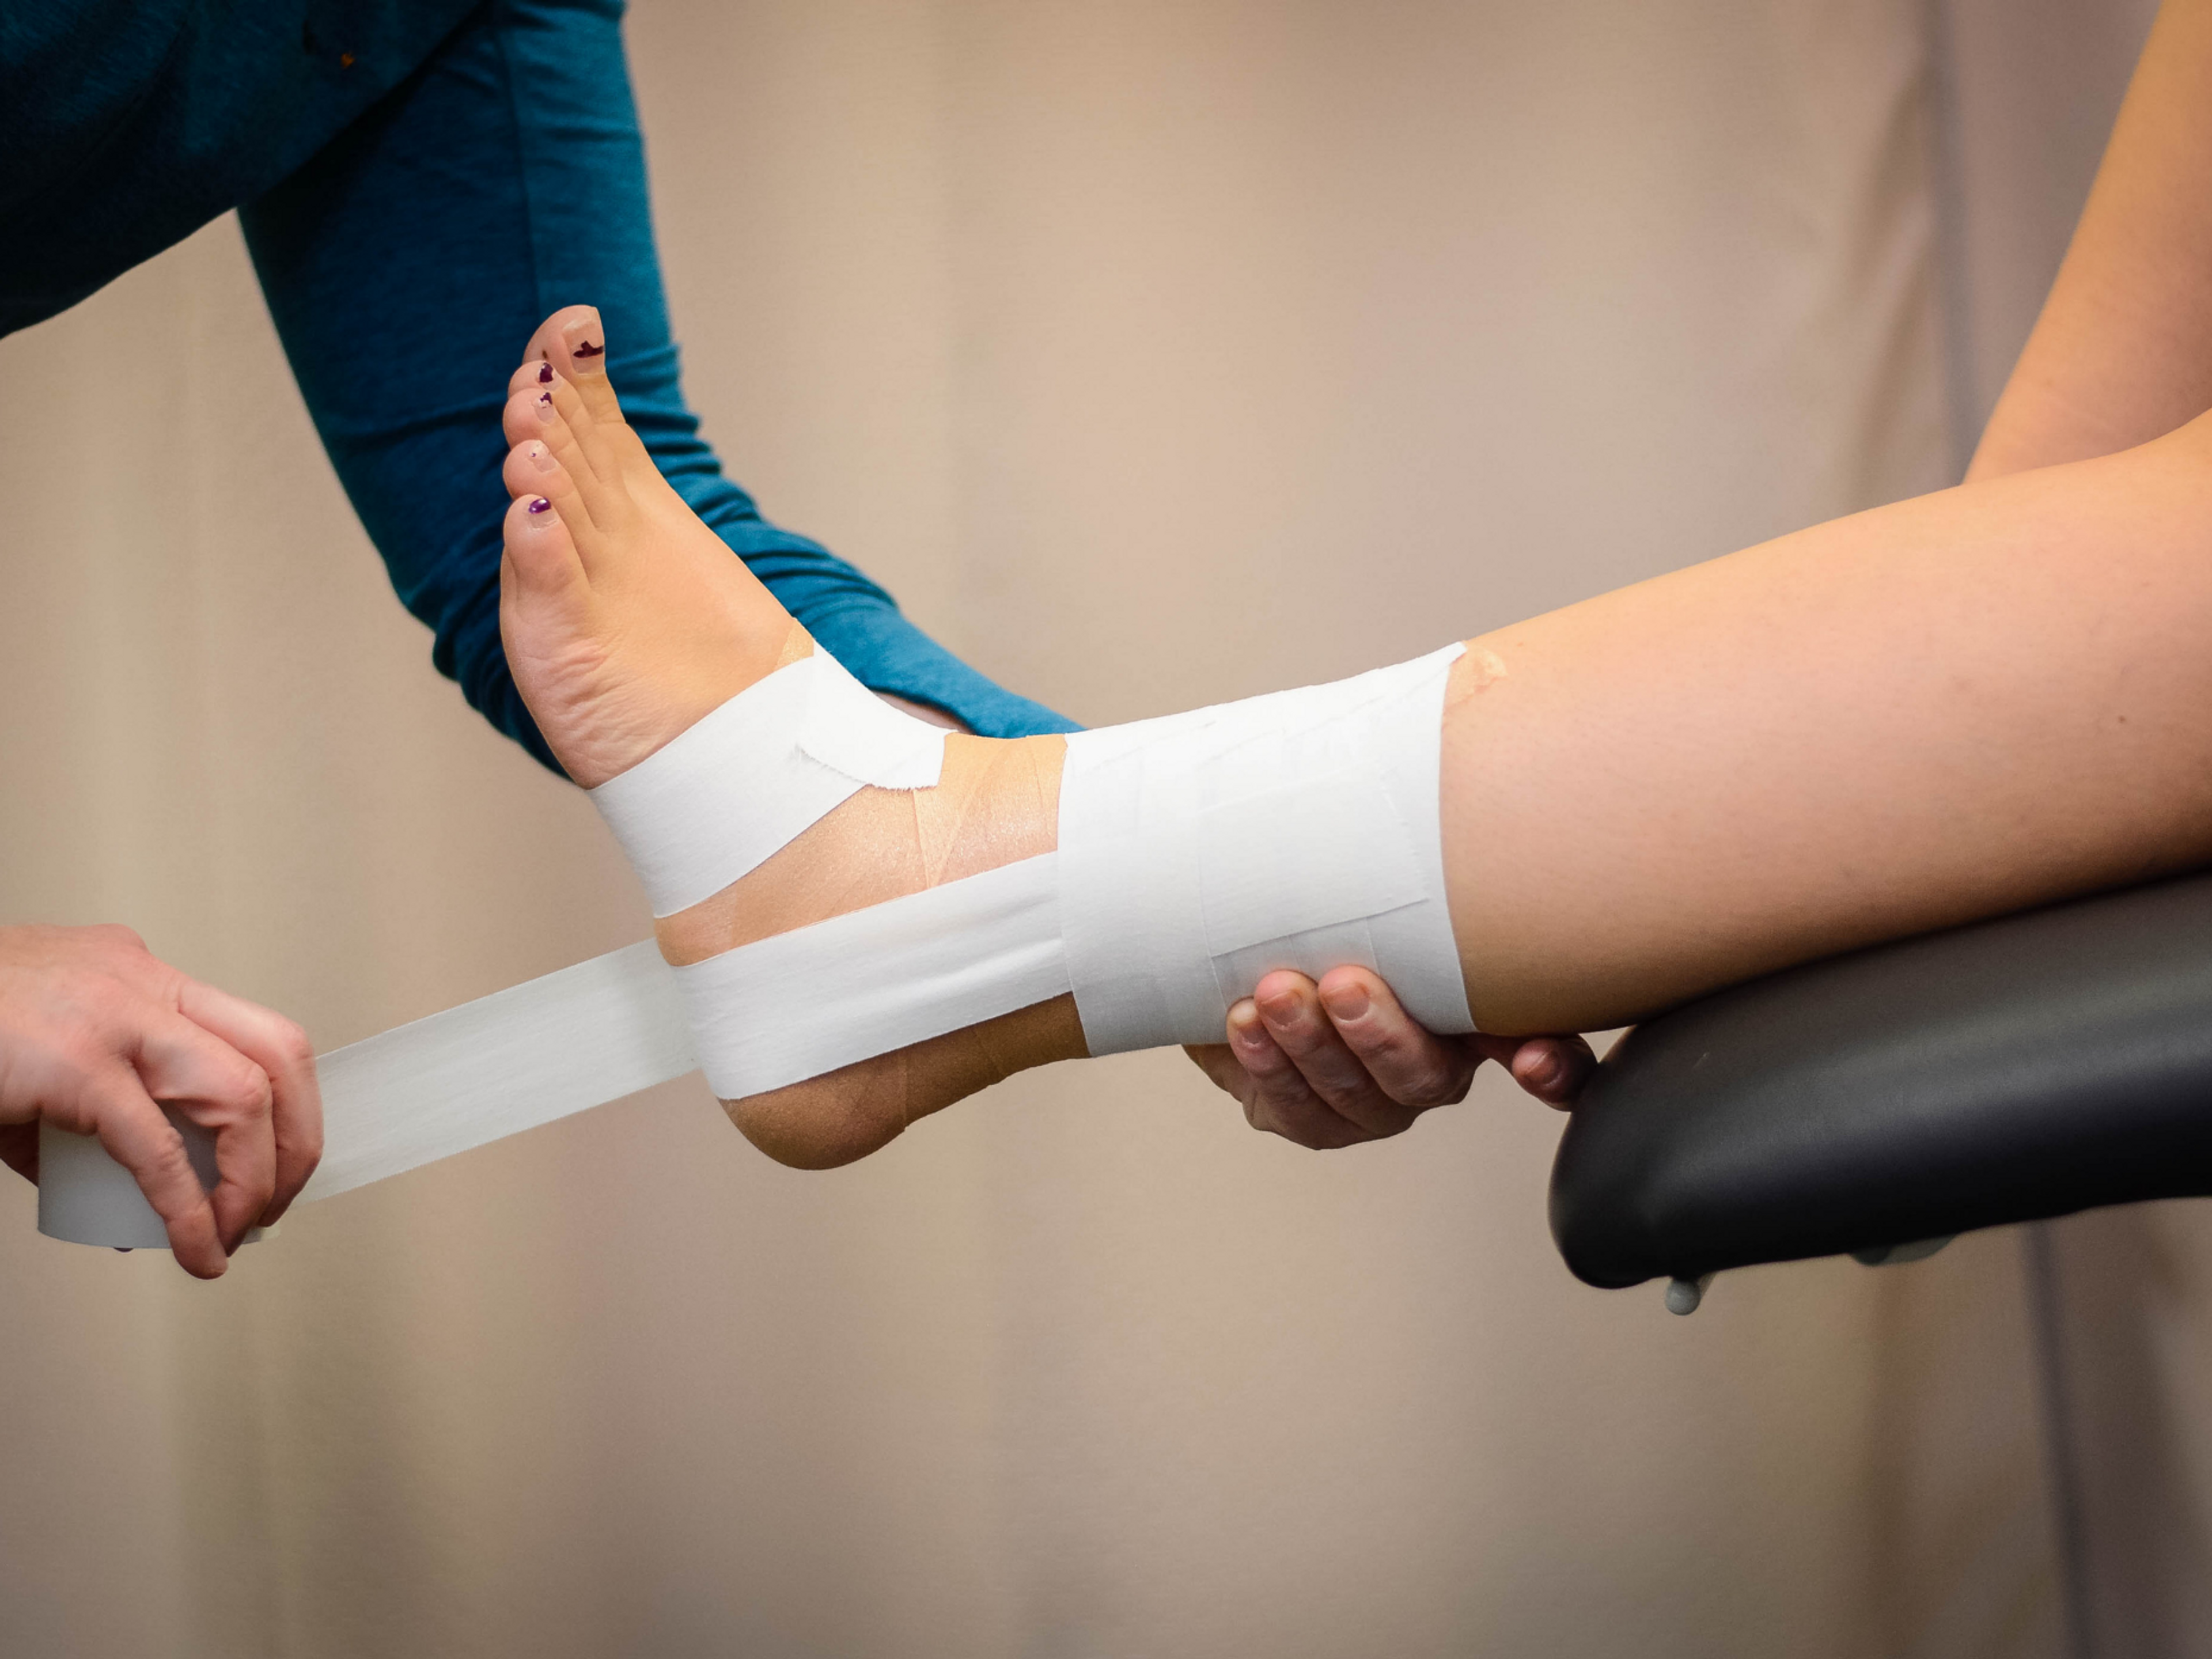 Taping a sprained ankle with rigid zinc-oxide tape can help to provide stability and prevent reinjury.